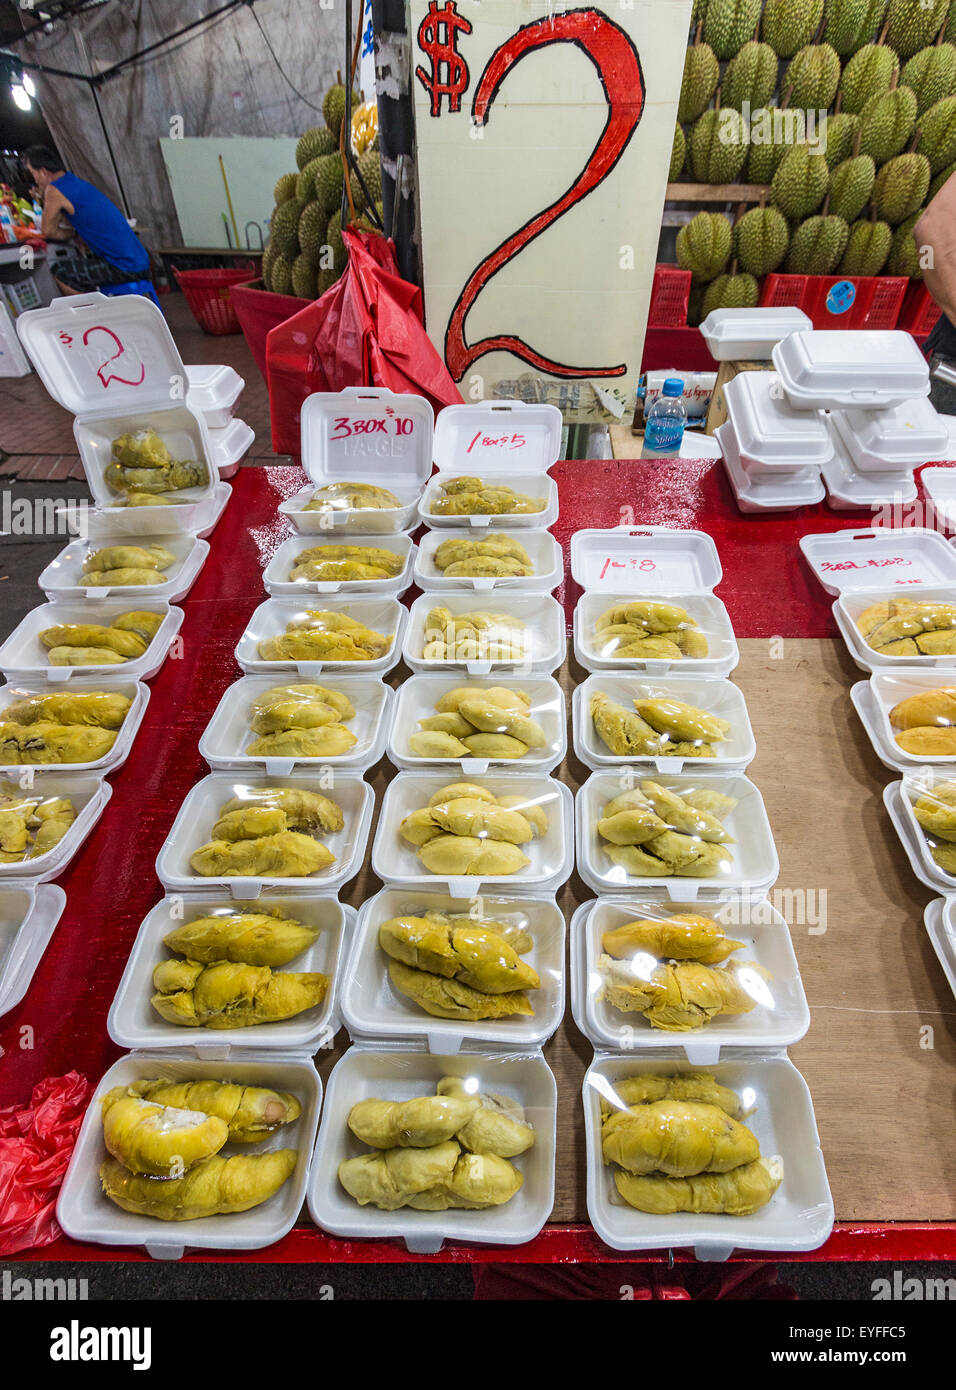 Famously smelly durian fruit, for sale at a night market in Singapore. The sickly sweet smell from this fruit is so intense, it Stock Photo